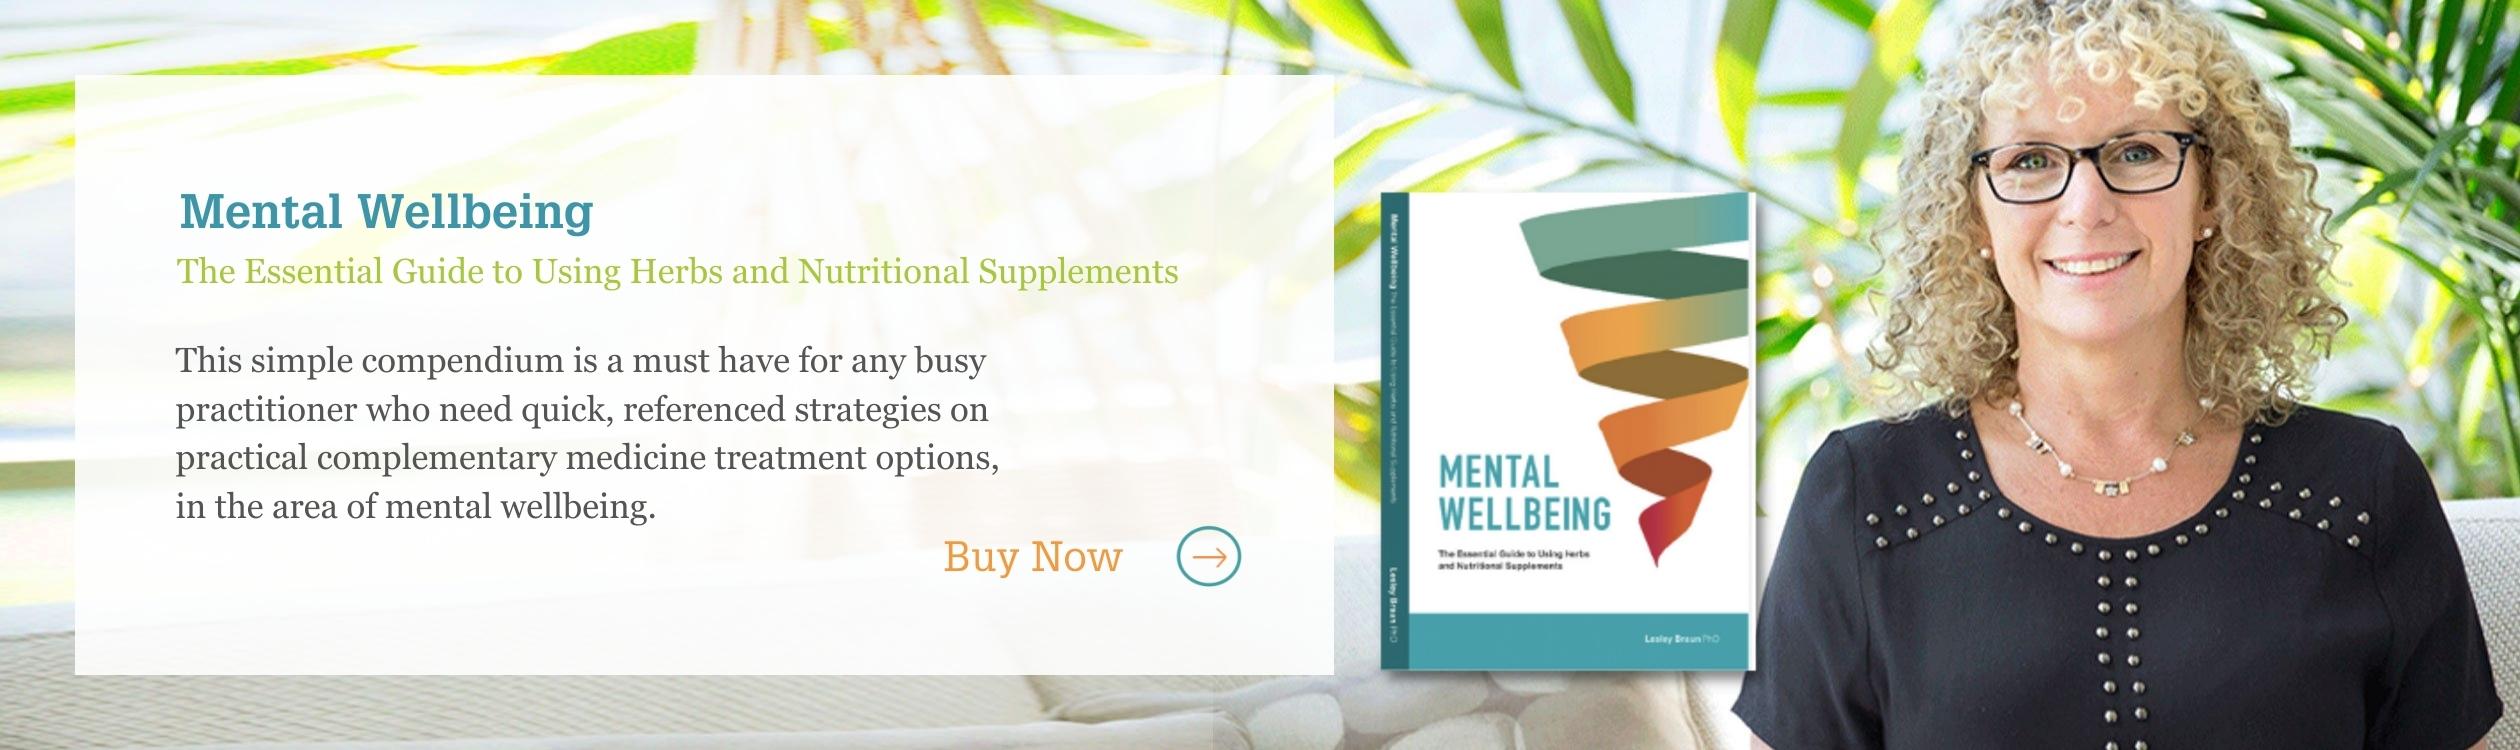 Mental Wellbeing - The Essential Guide to Using Herbs and Nutritional Supplements